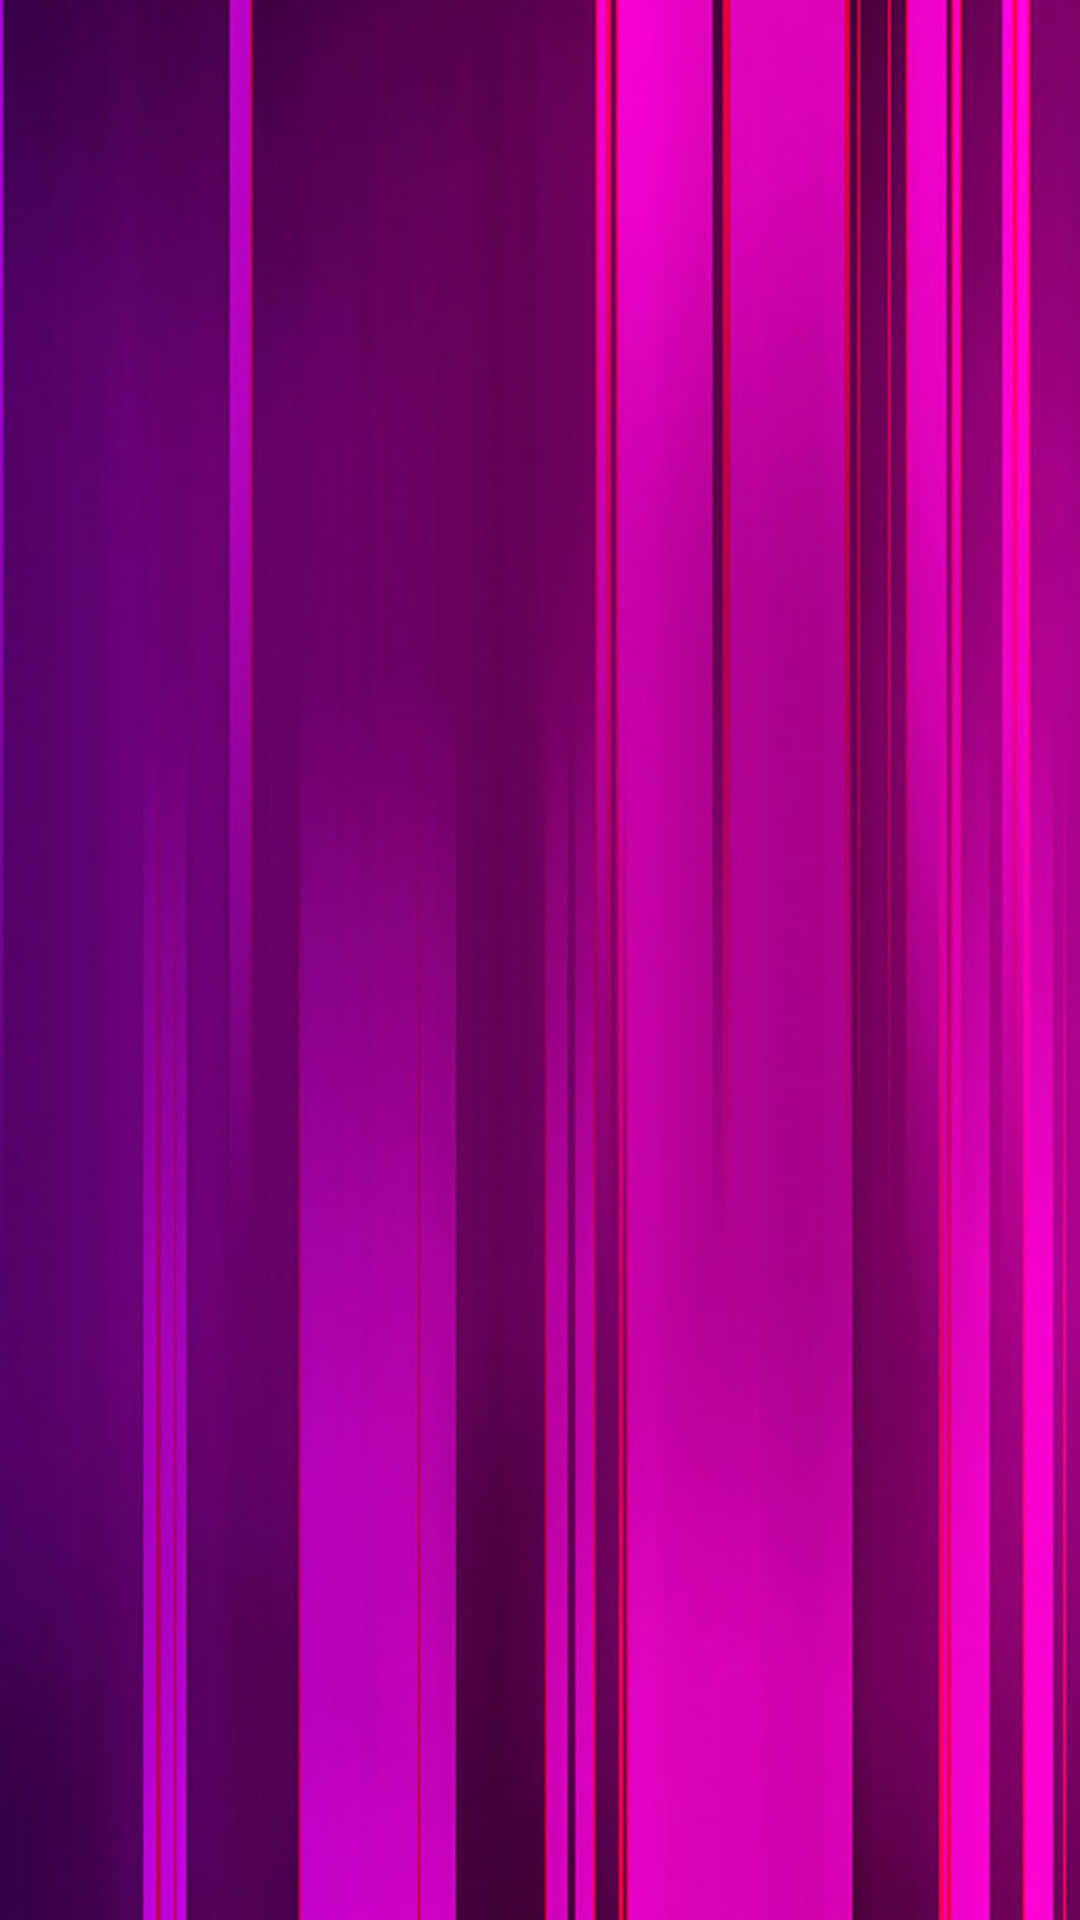 Vibrant and Colorful Purple-Pink Abstract Background